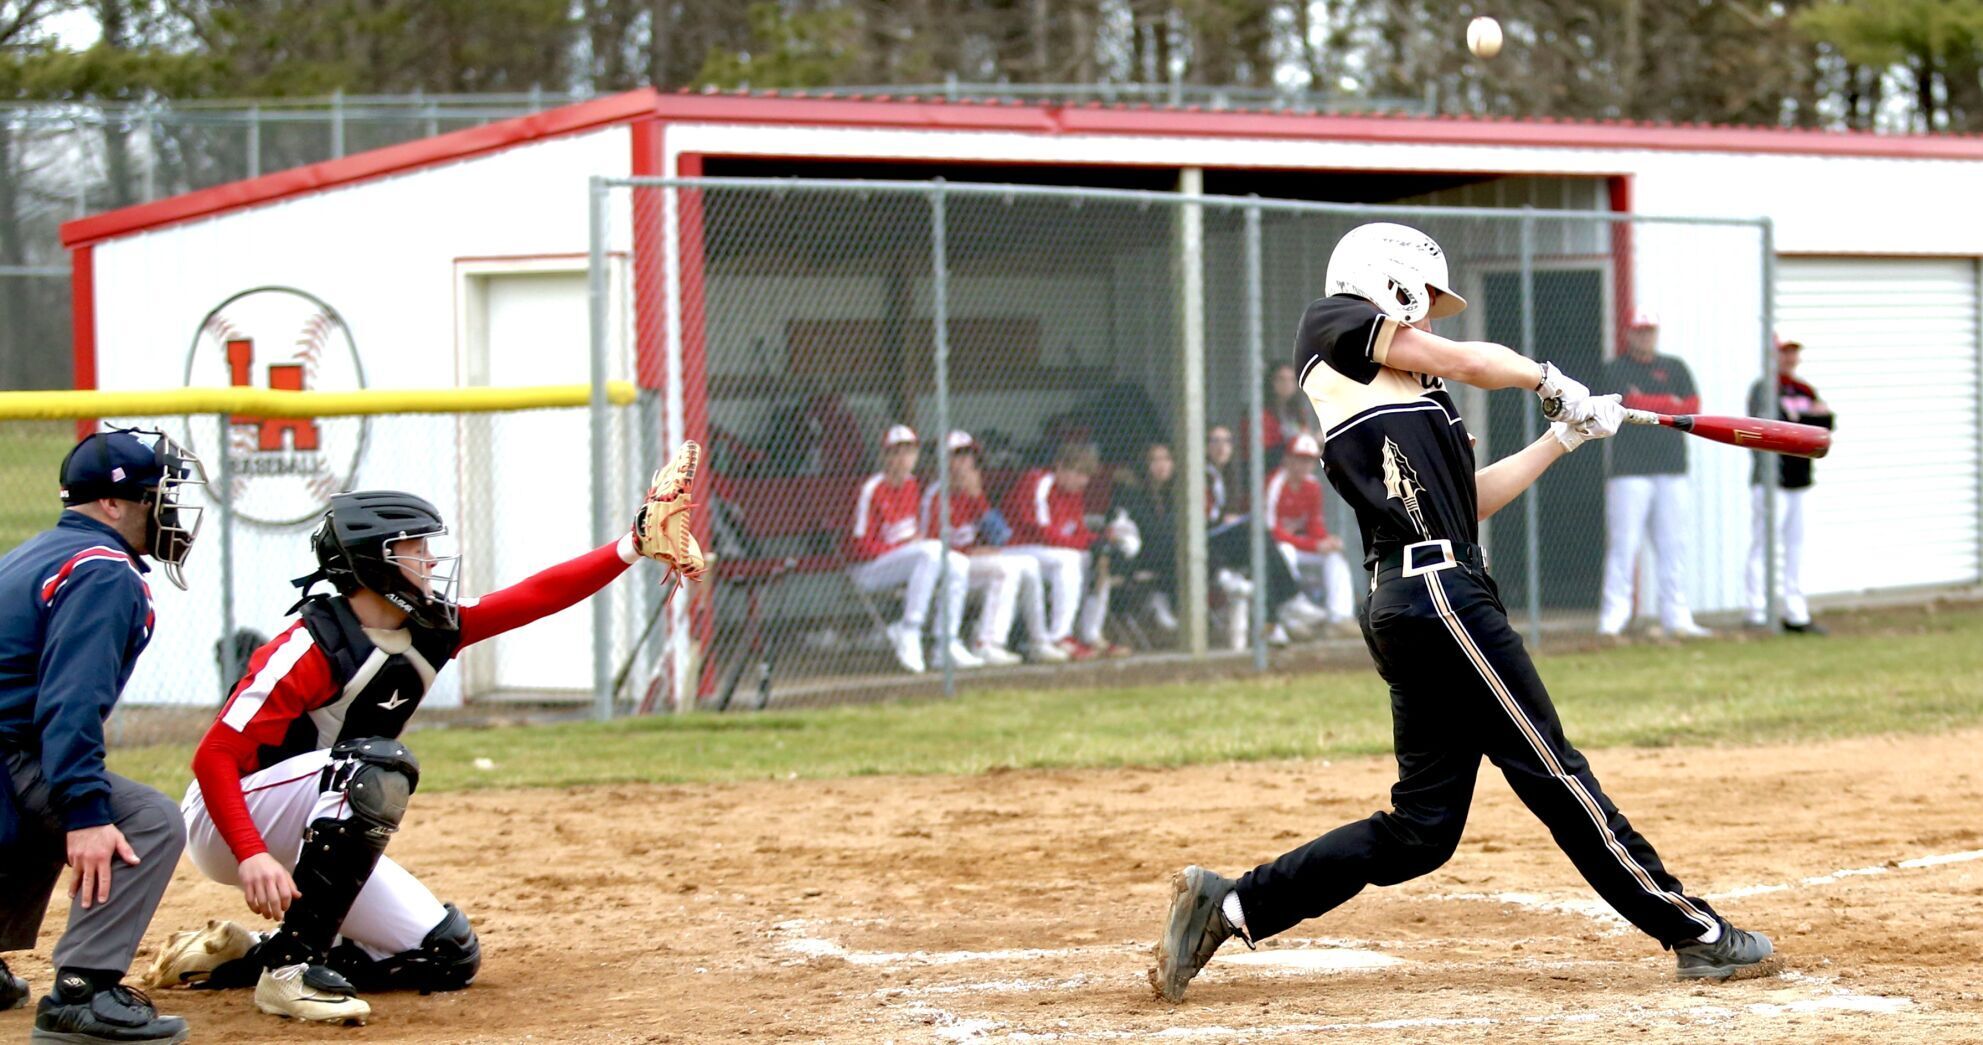 Local sports schedule: Tuesday, April 16